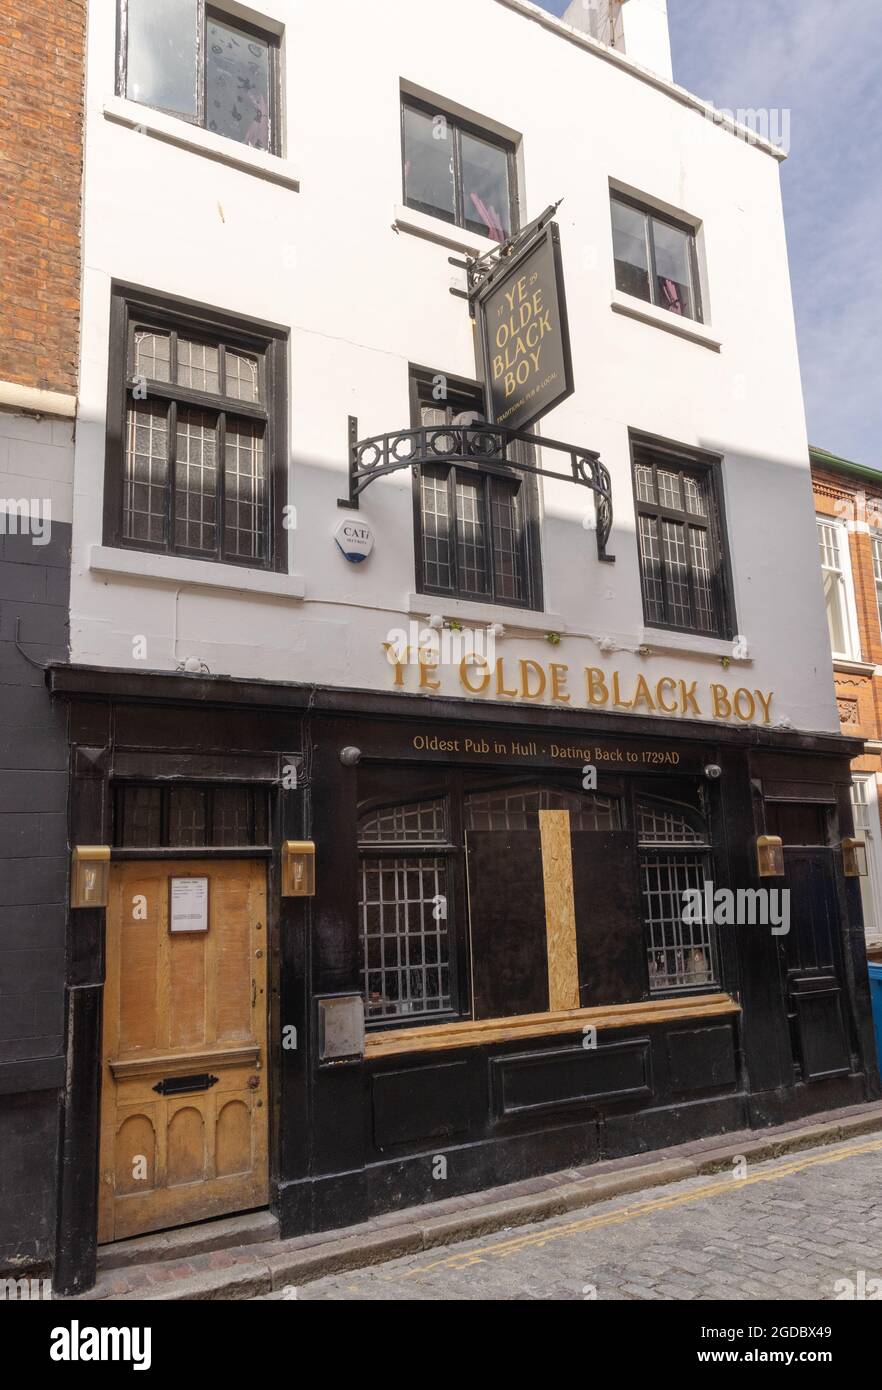 Ye Olde Black Boy pub, Hull, Yorkshire UK. The oldest pub in Hull, founded 1729. Example of 128th century english pubs Stock Photo